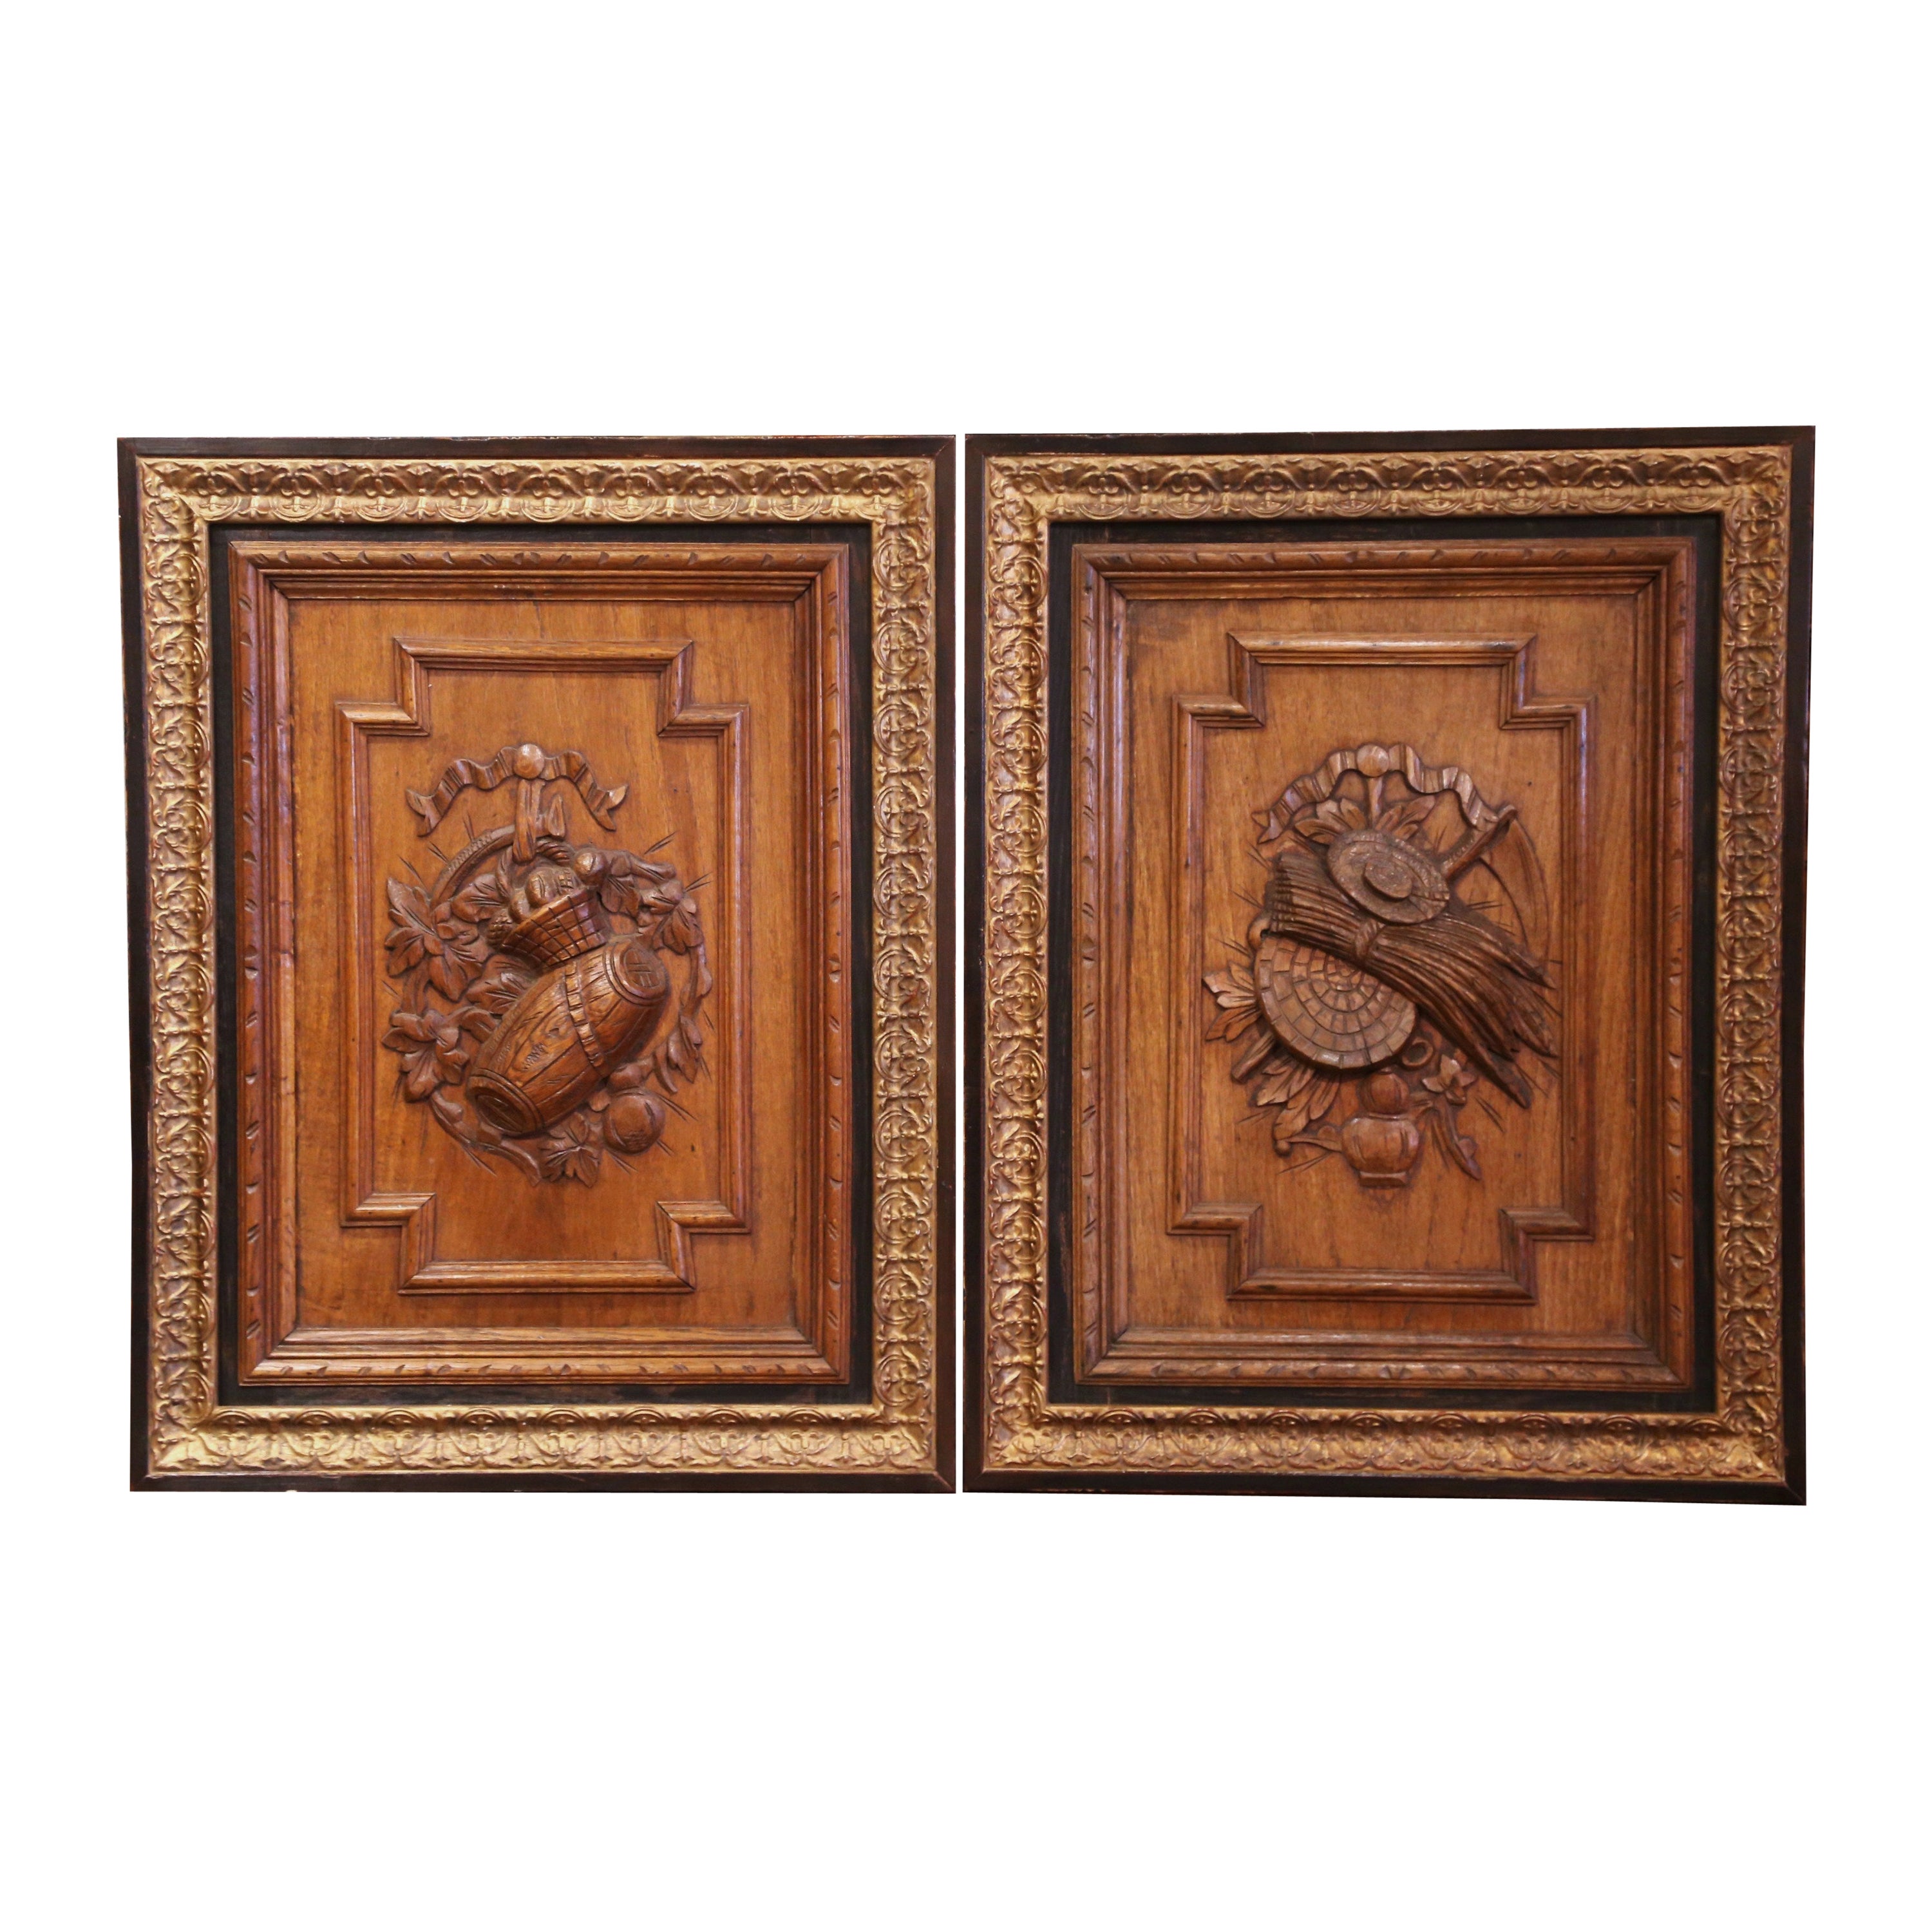 Pair of 19th Century, French Carved Oak Wall Door Panels in Gilt Frames